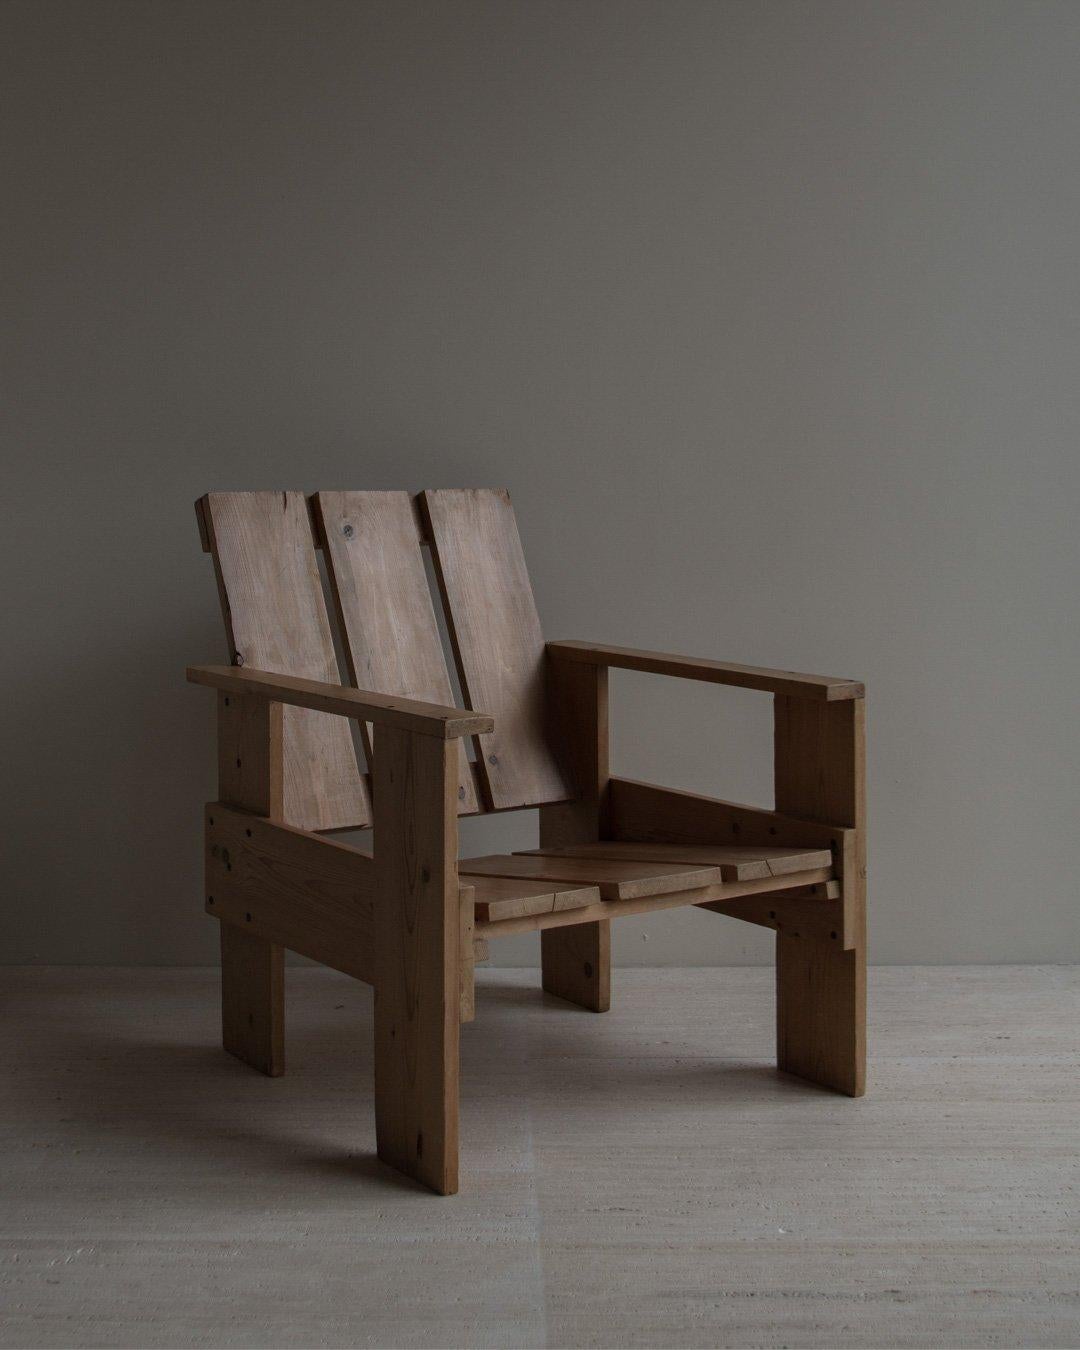 Crate chair designed by Gerrit Thomas Rietveld, executed circa 1960 by an unknown producer in the Netherlands.

Gerrit Thomas Rietveld (1888–1964) was a Dutch furniture designer and architect. One of the principal members of the Dutch artistic